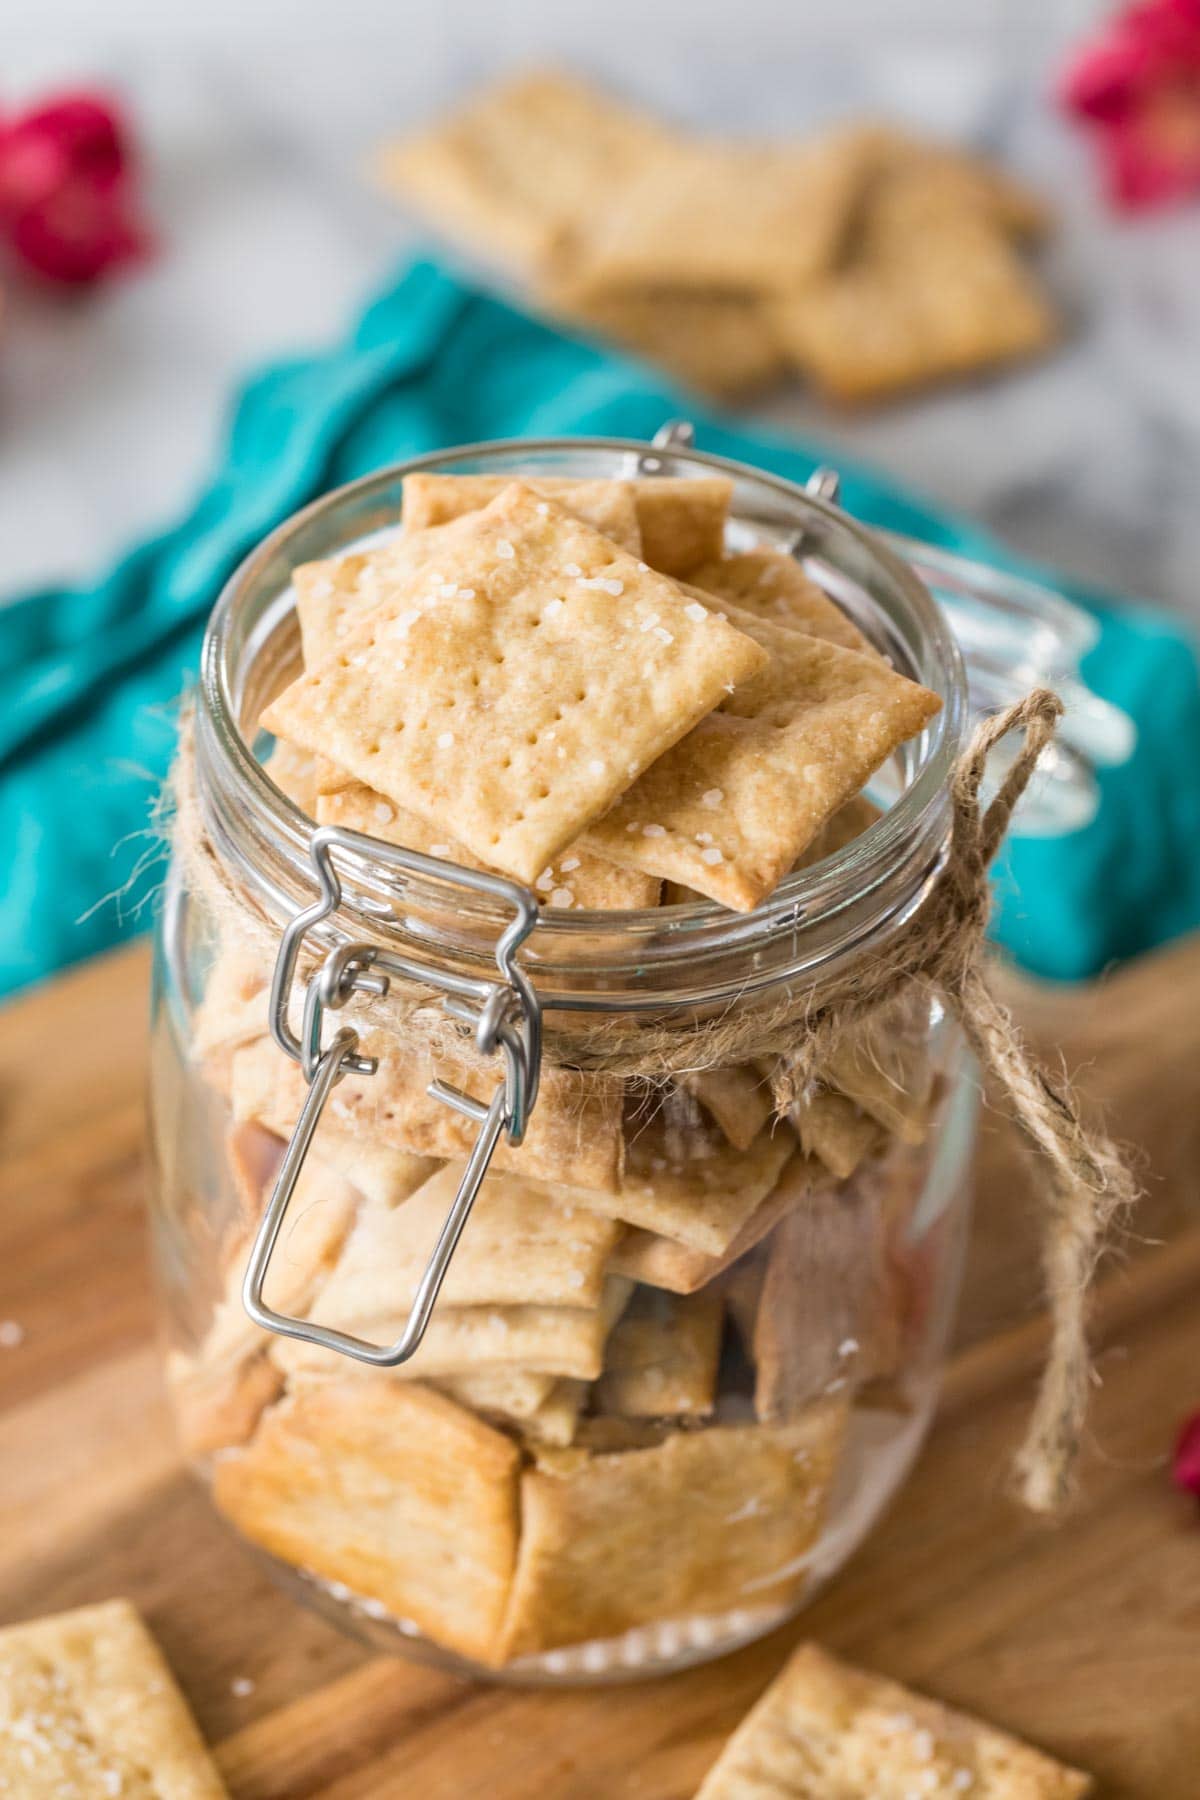 Jar filled with crackers made with sourdough discard.